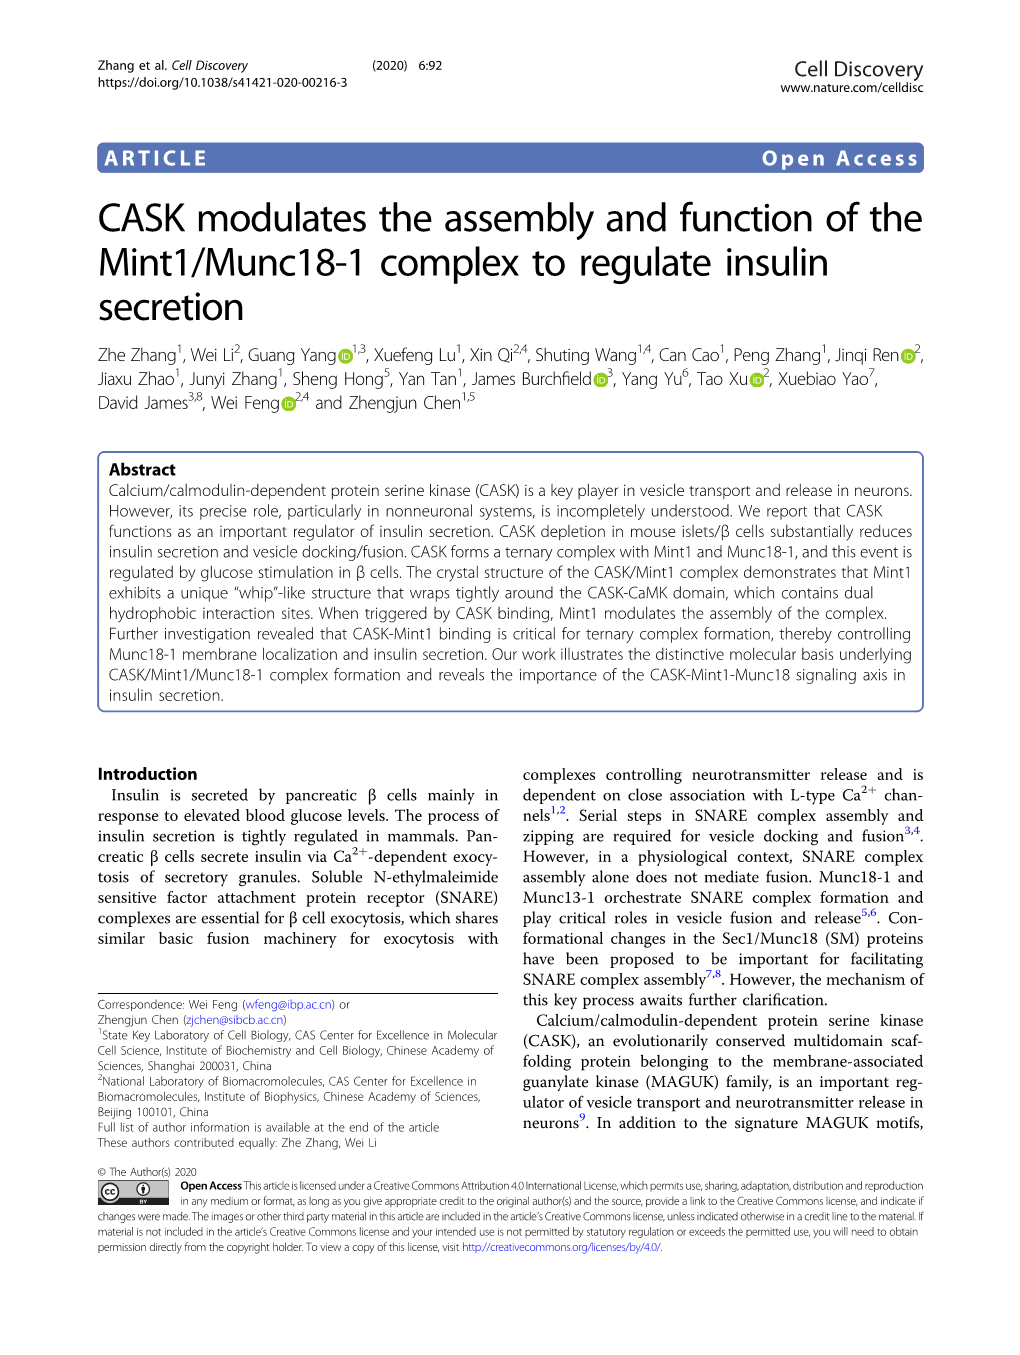 CASK Modulates the Assembly and Function of the Mint1/Munc18-1